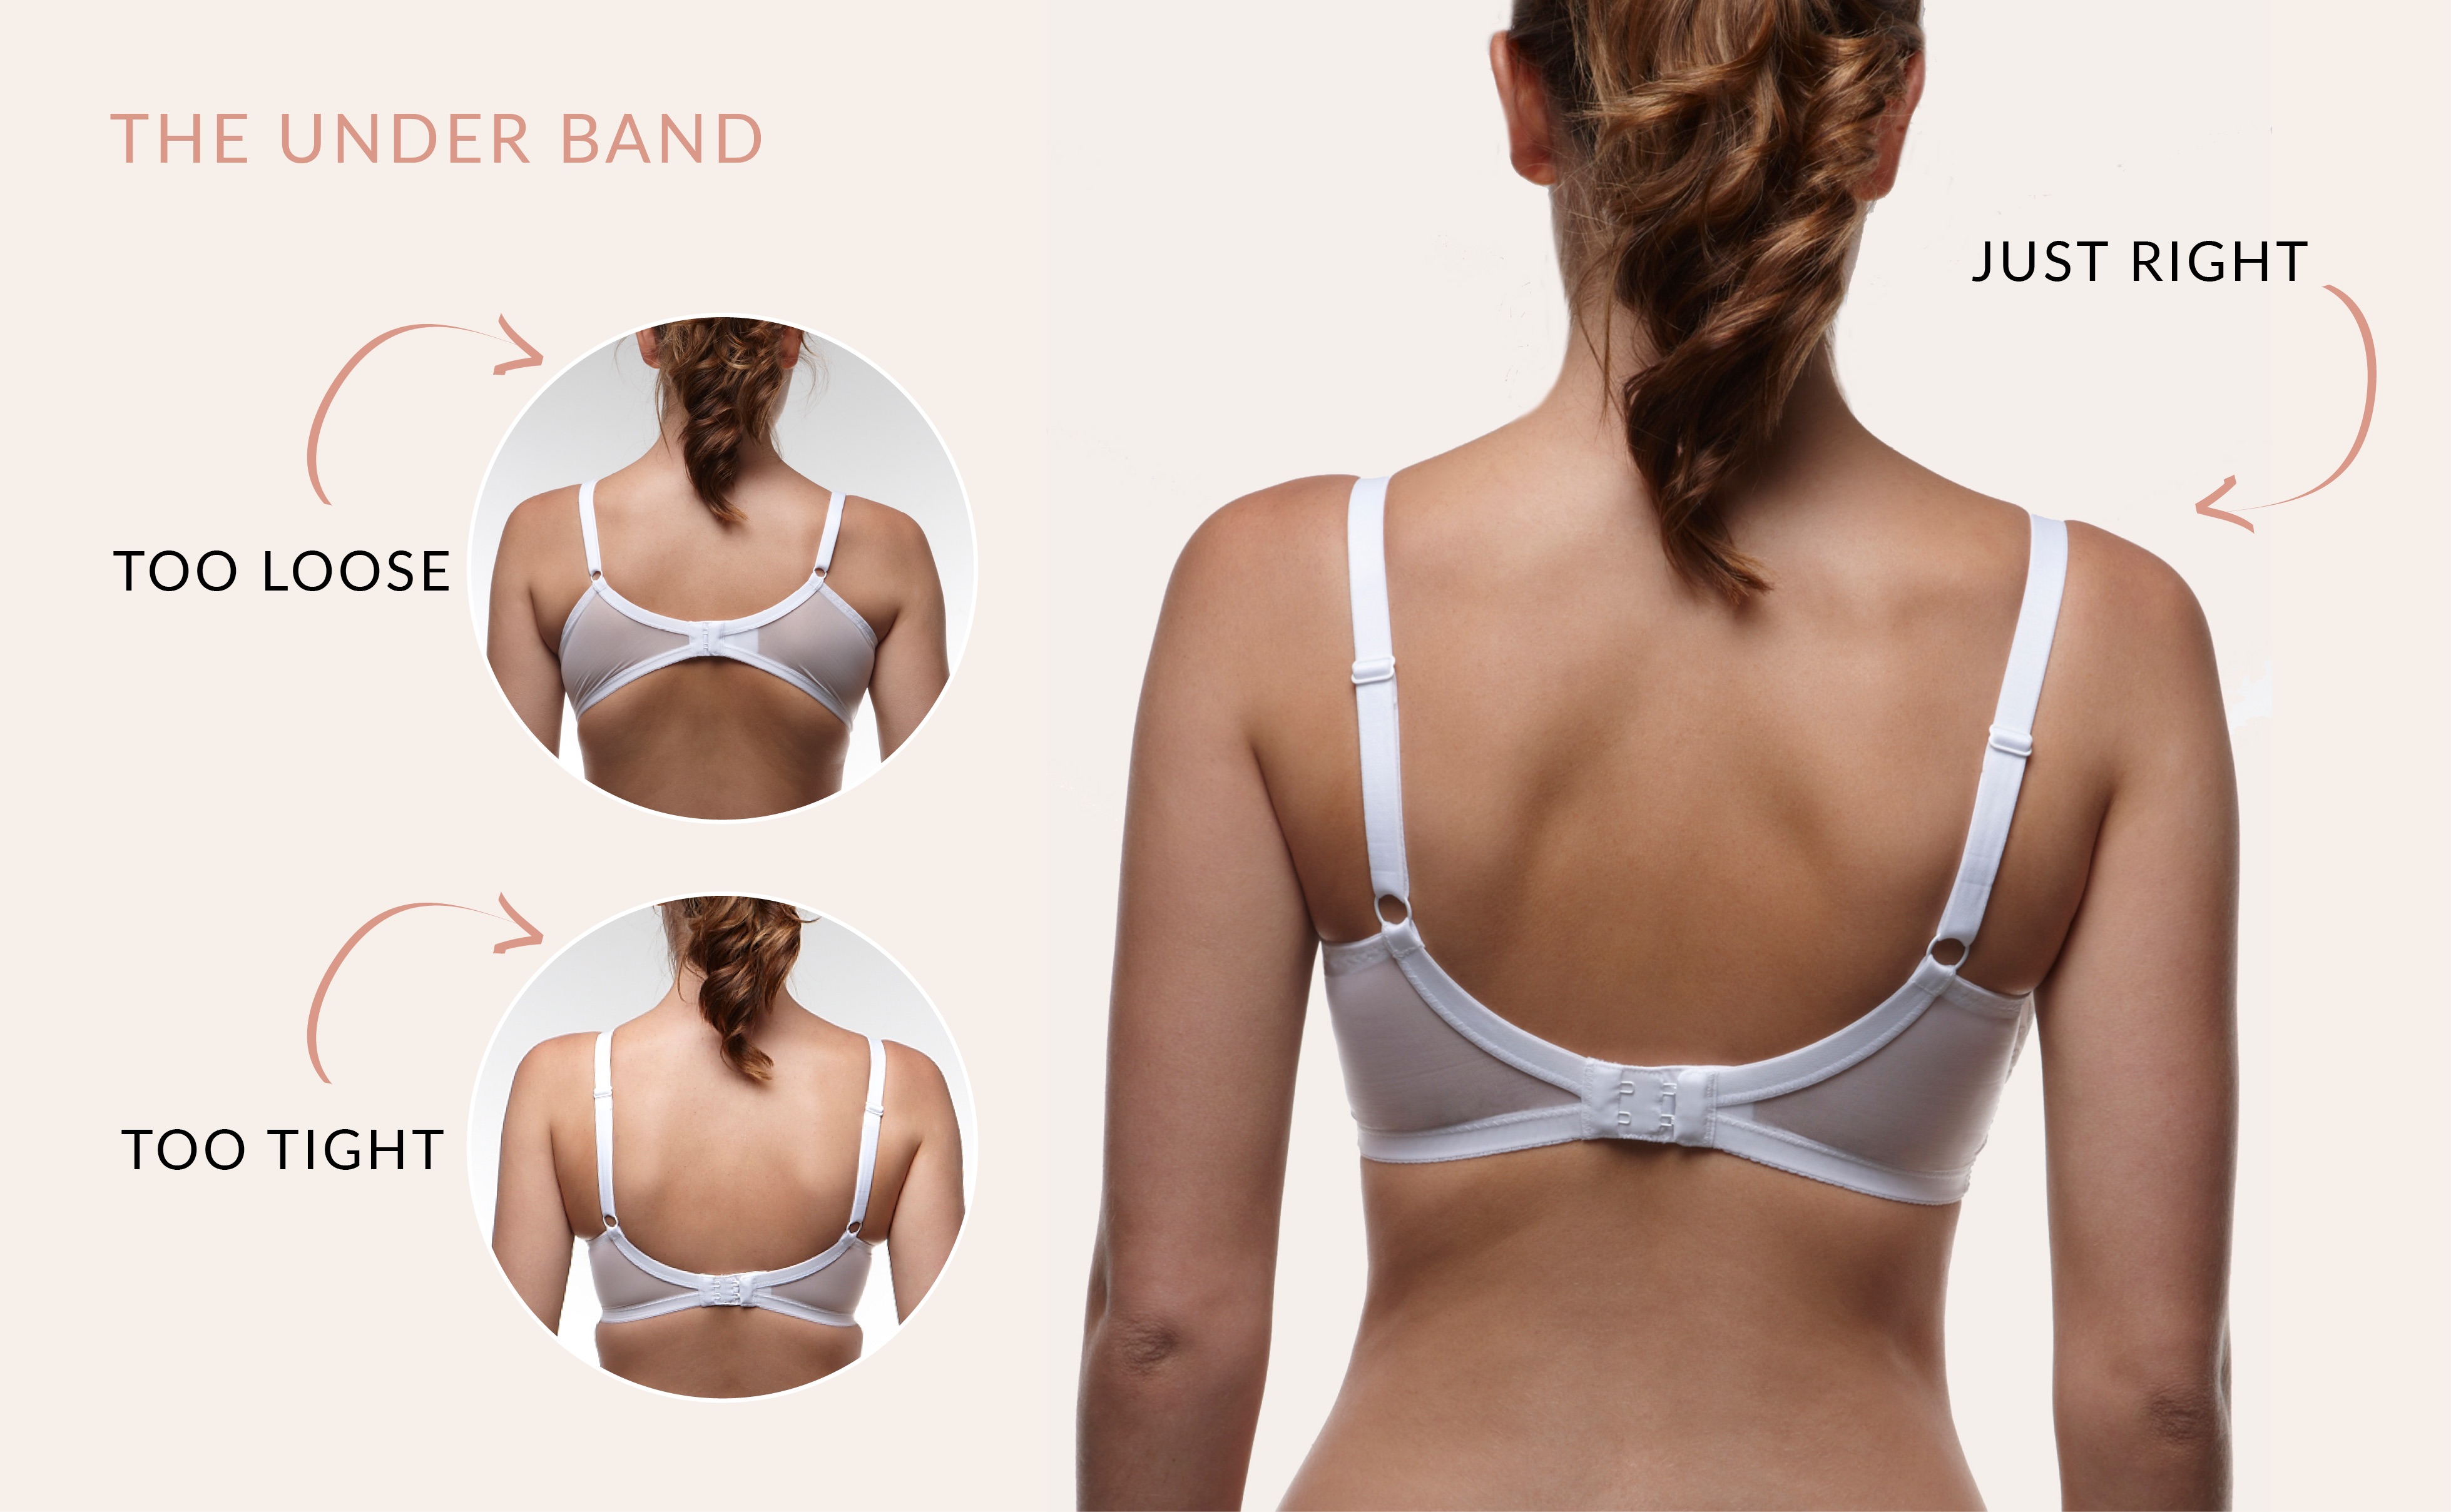 How to measure for a perfect fitting bra